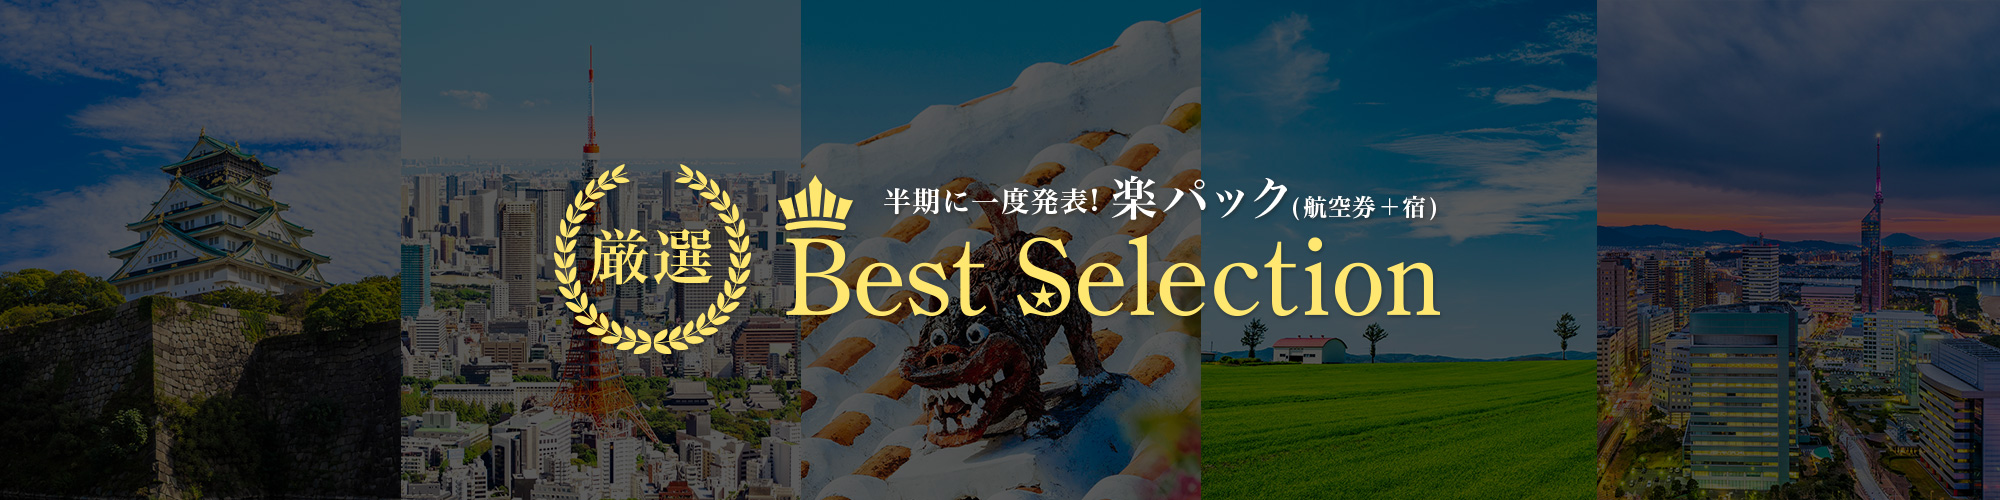 Best Selection